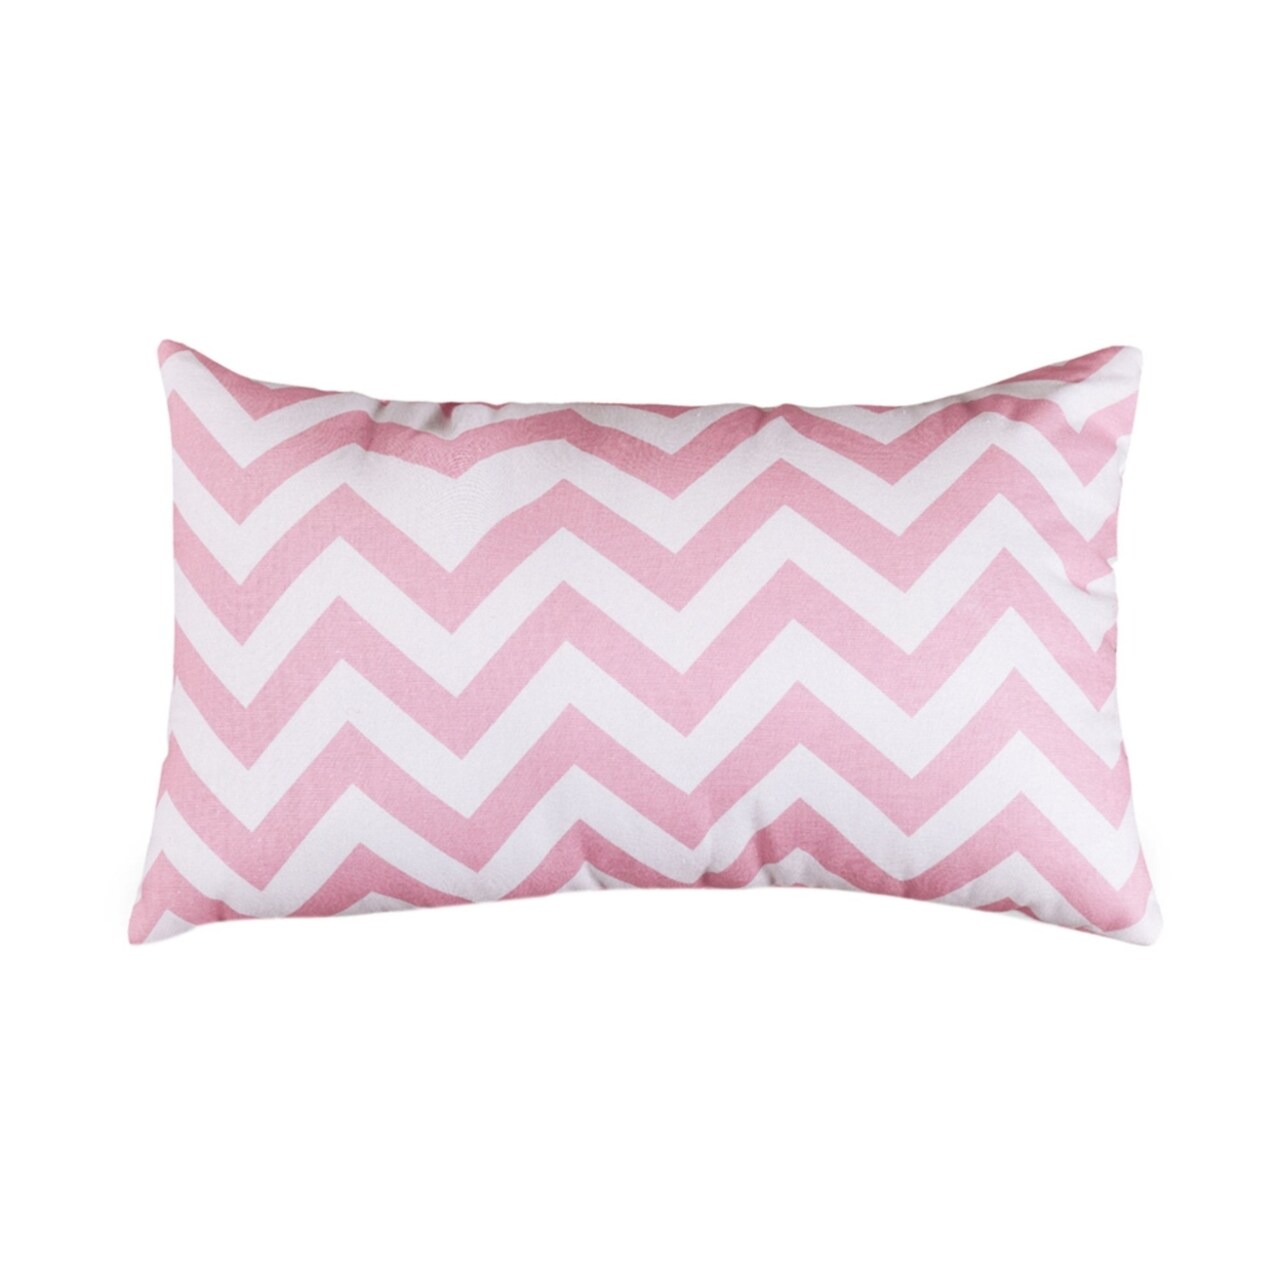 Majestic Home Goods Decorative Baby Pink Chevron Small Pillow